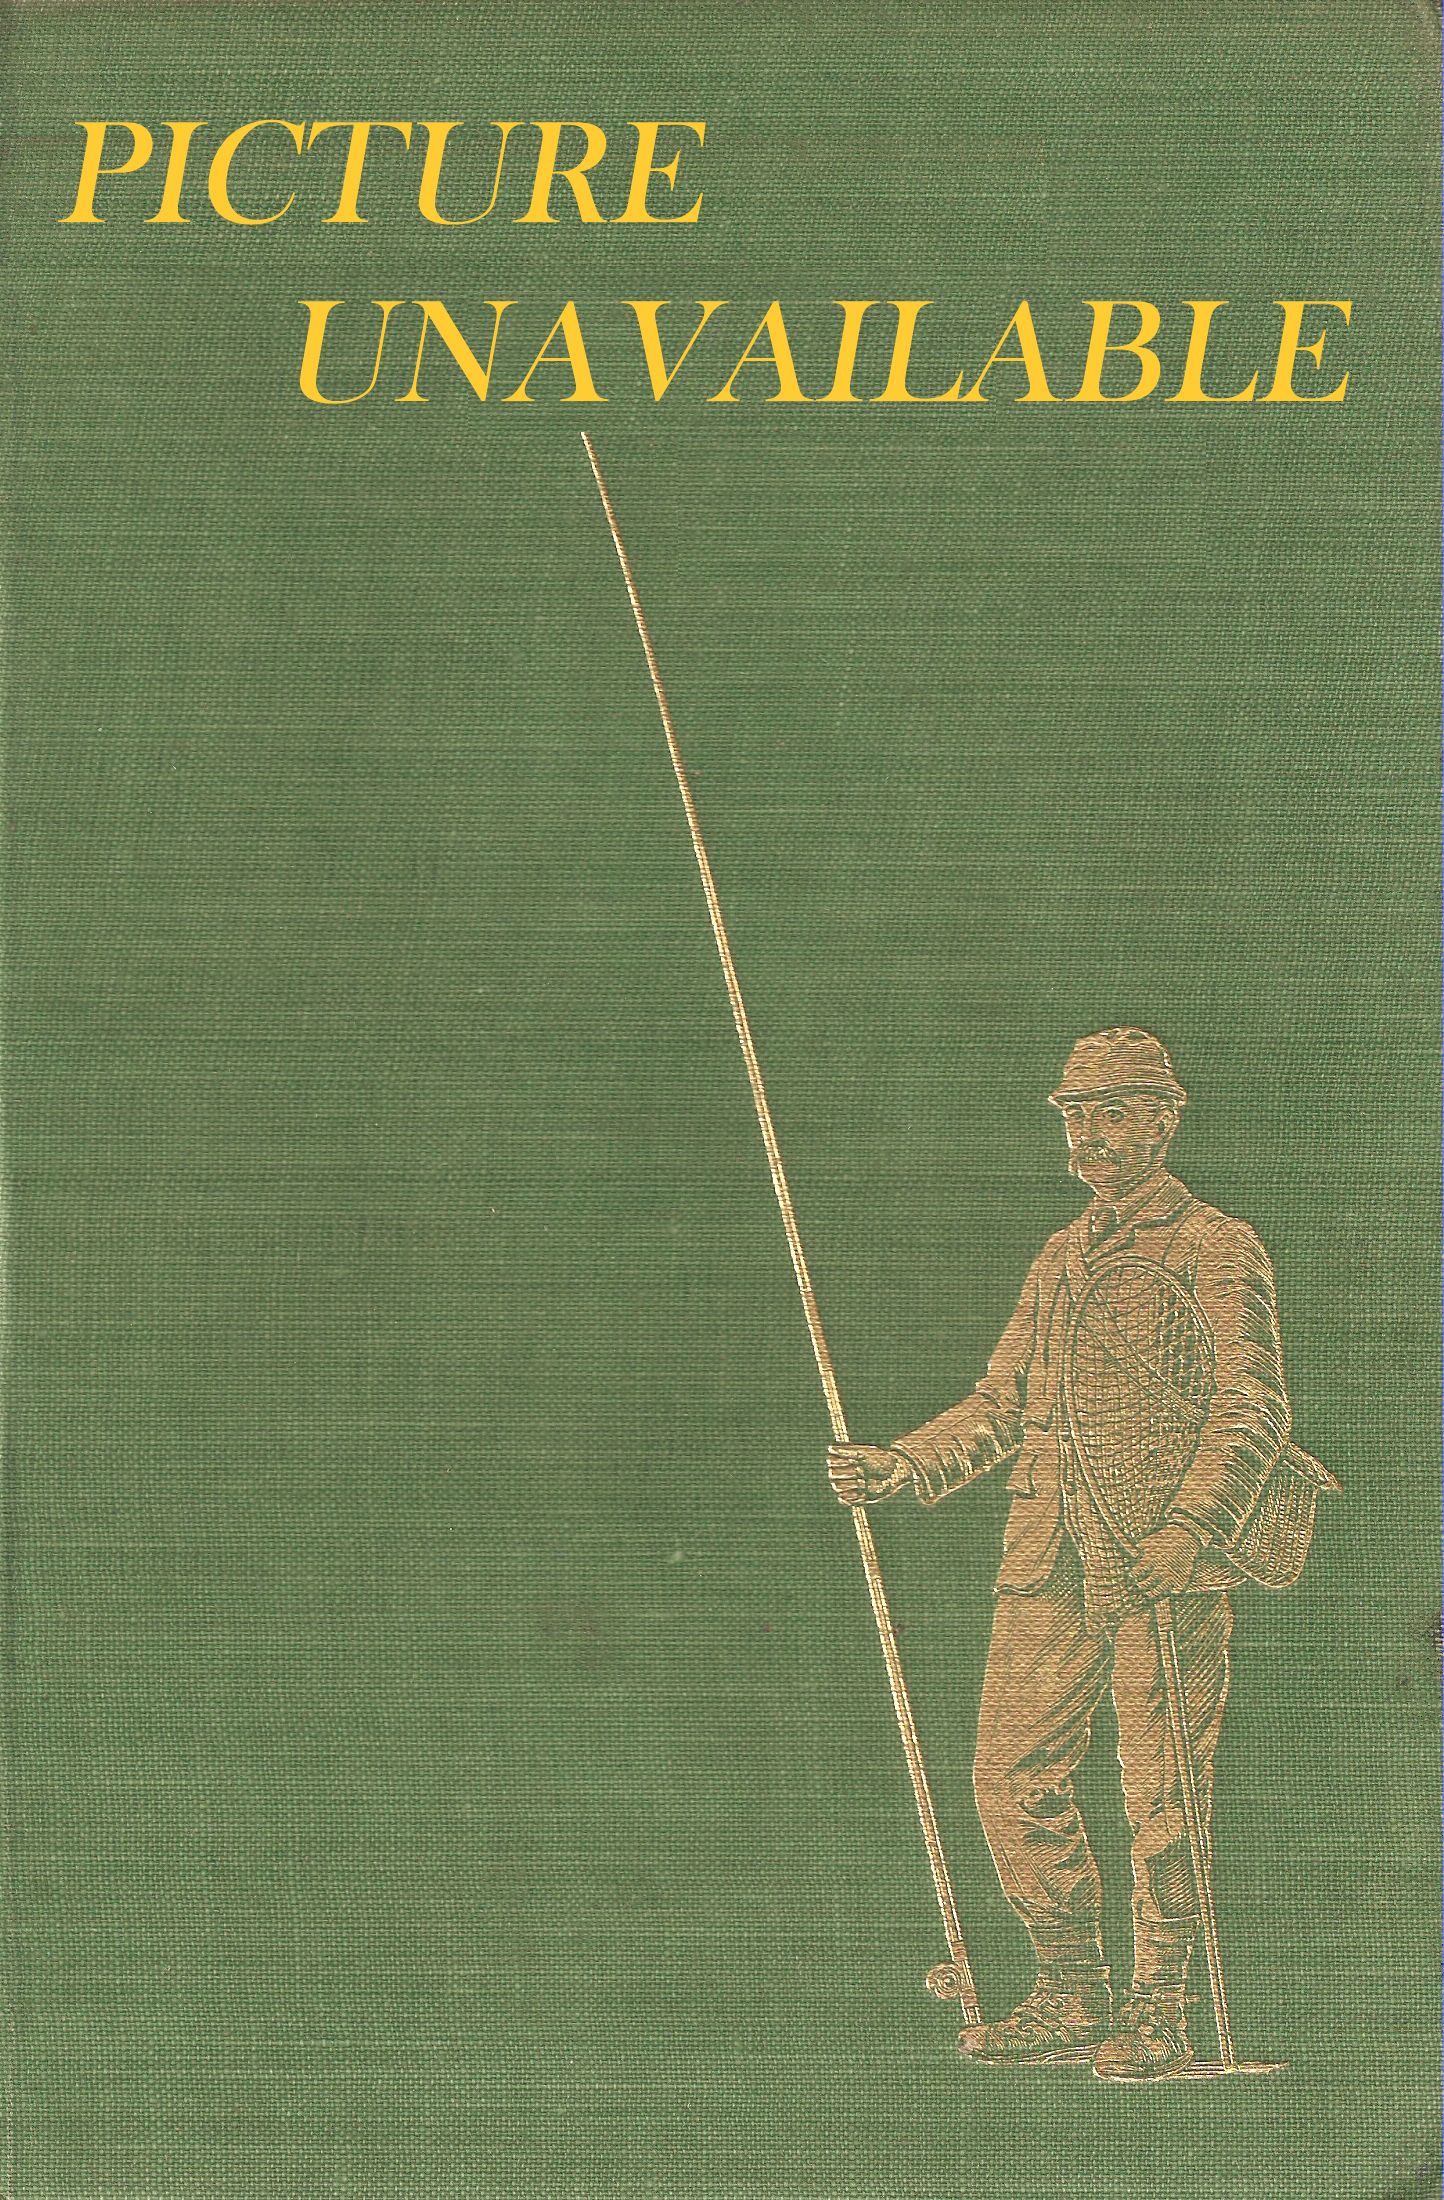 ROD IN HAND: AN ANGLER'S MOODS AND MEMORIES. By C.V. Hancock.